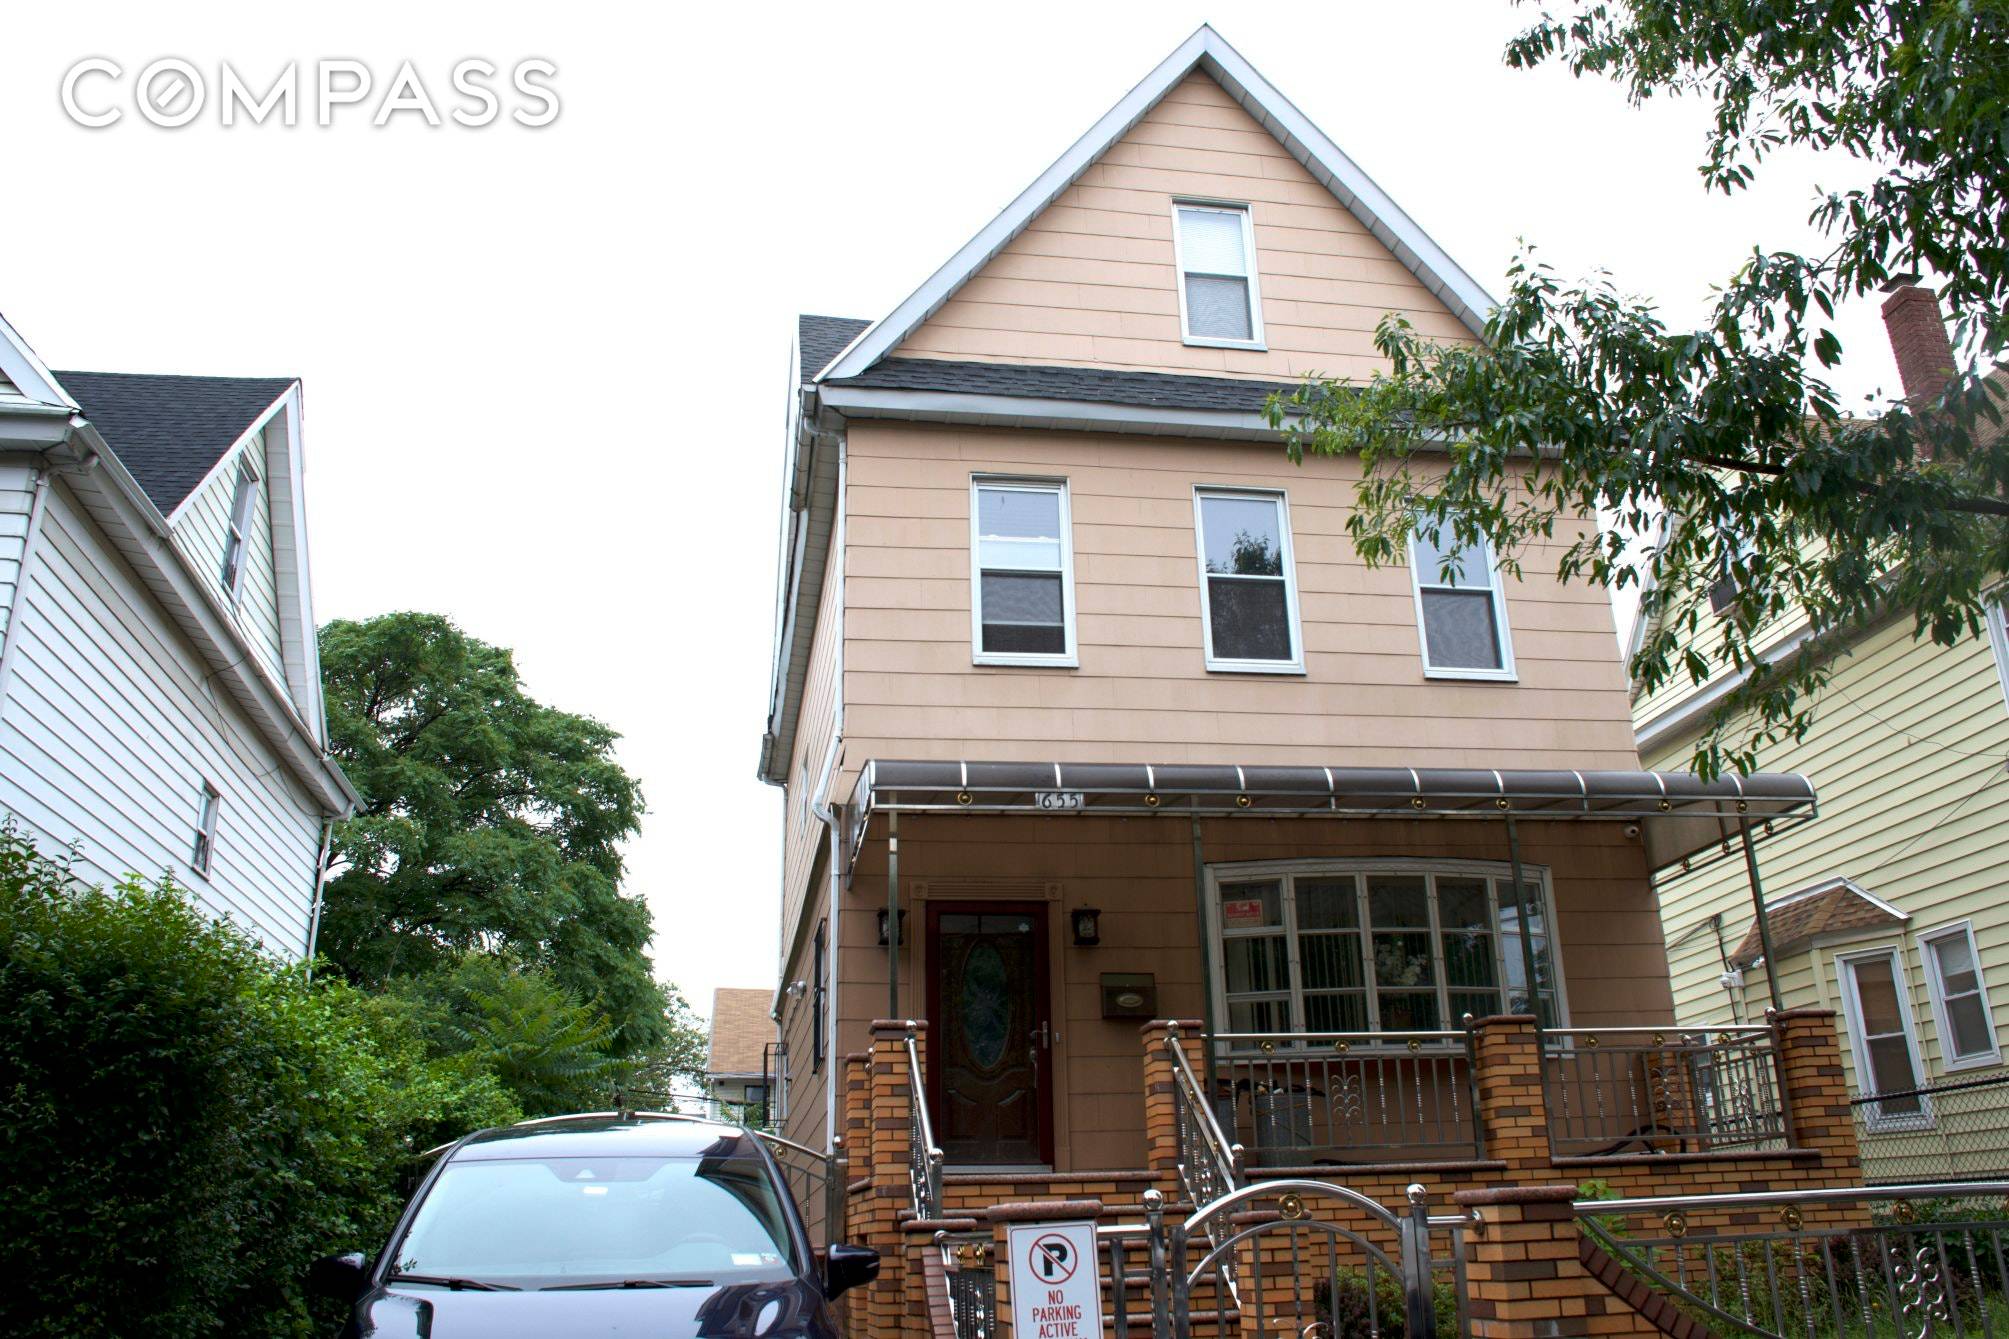 This massive fully detached single family free standing home is located in prime Kensington, only steps to the F train.